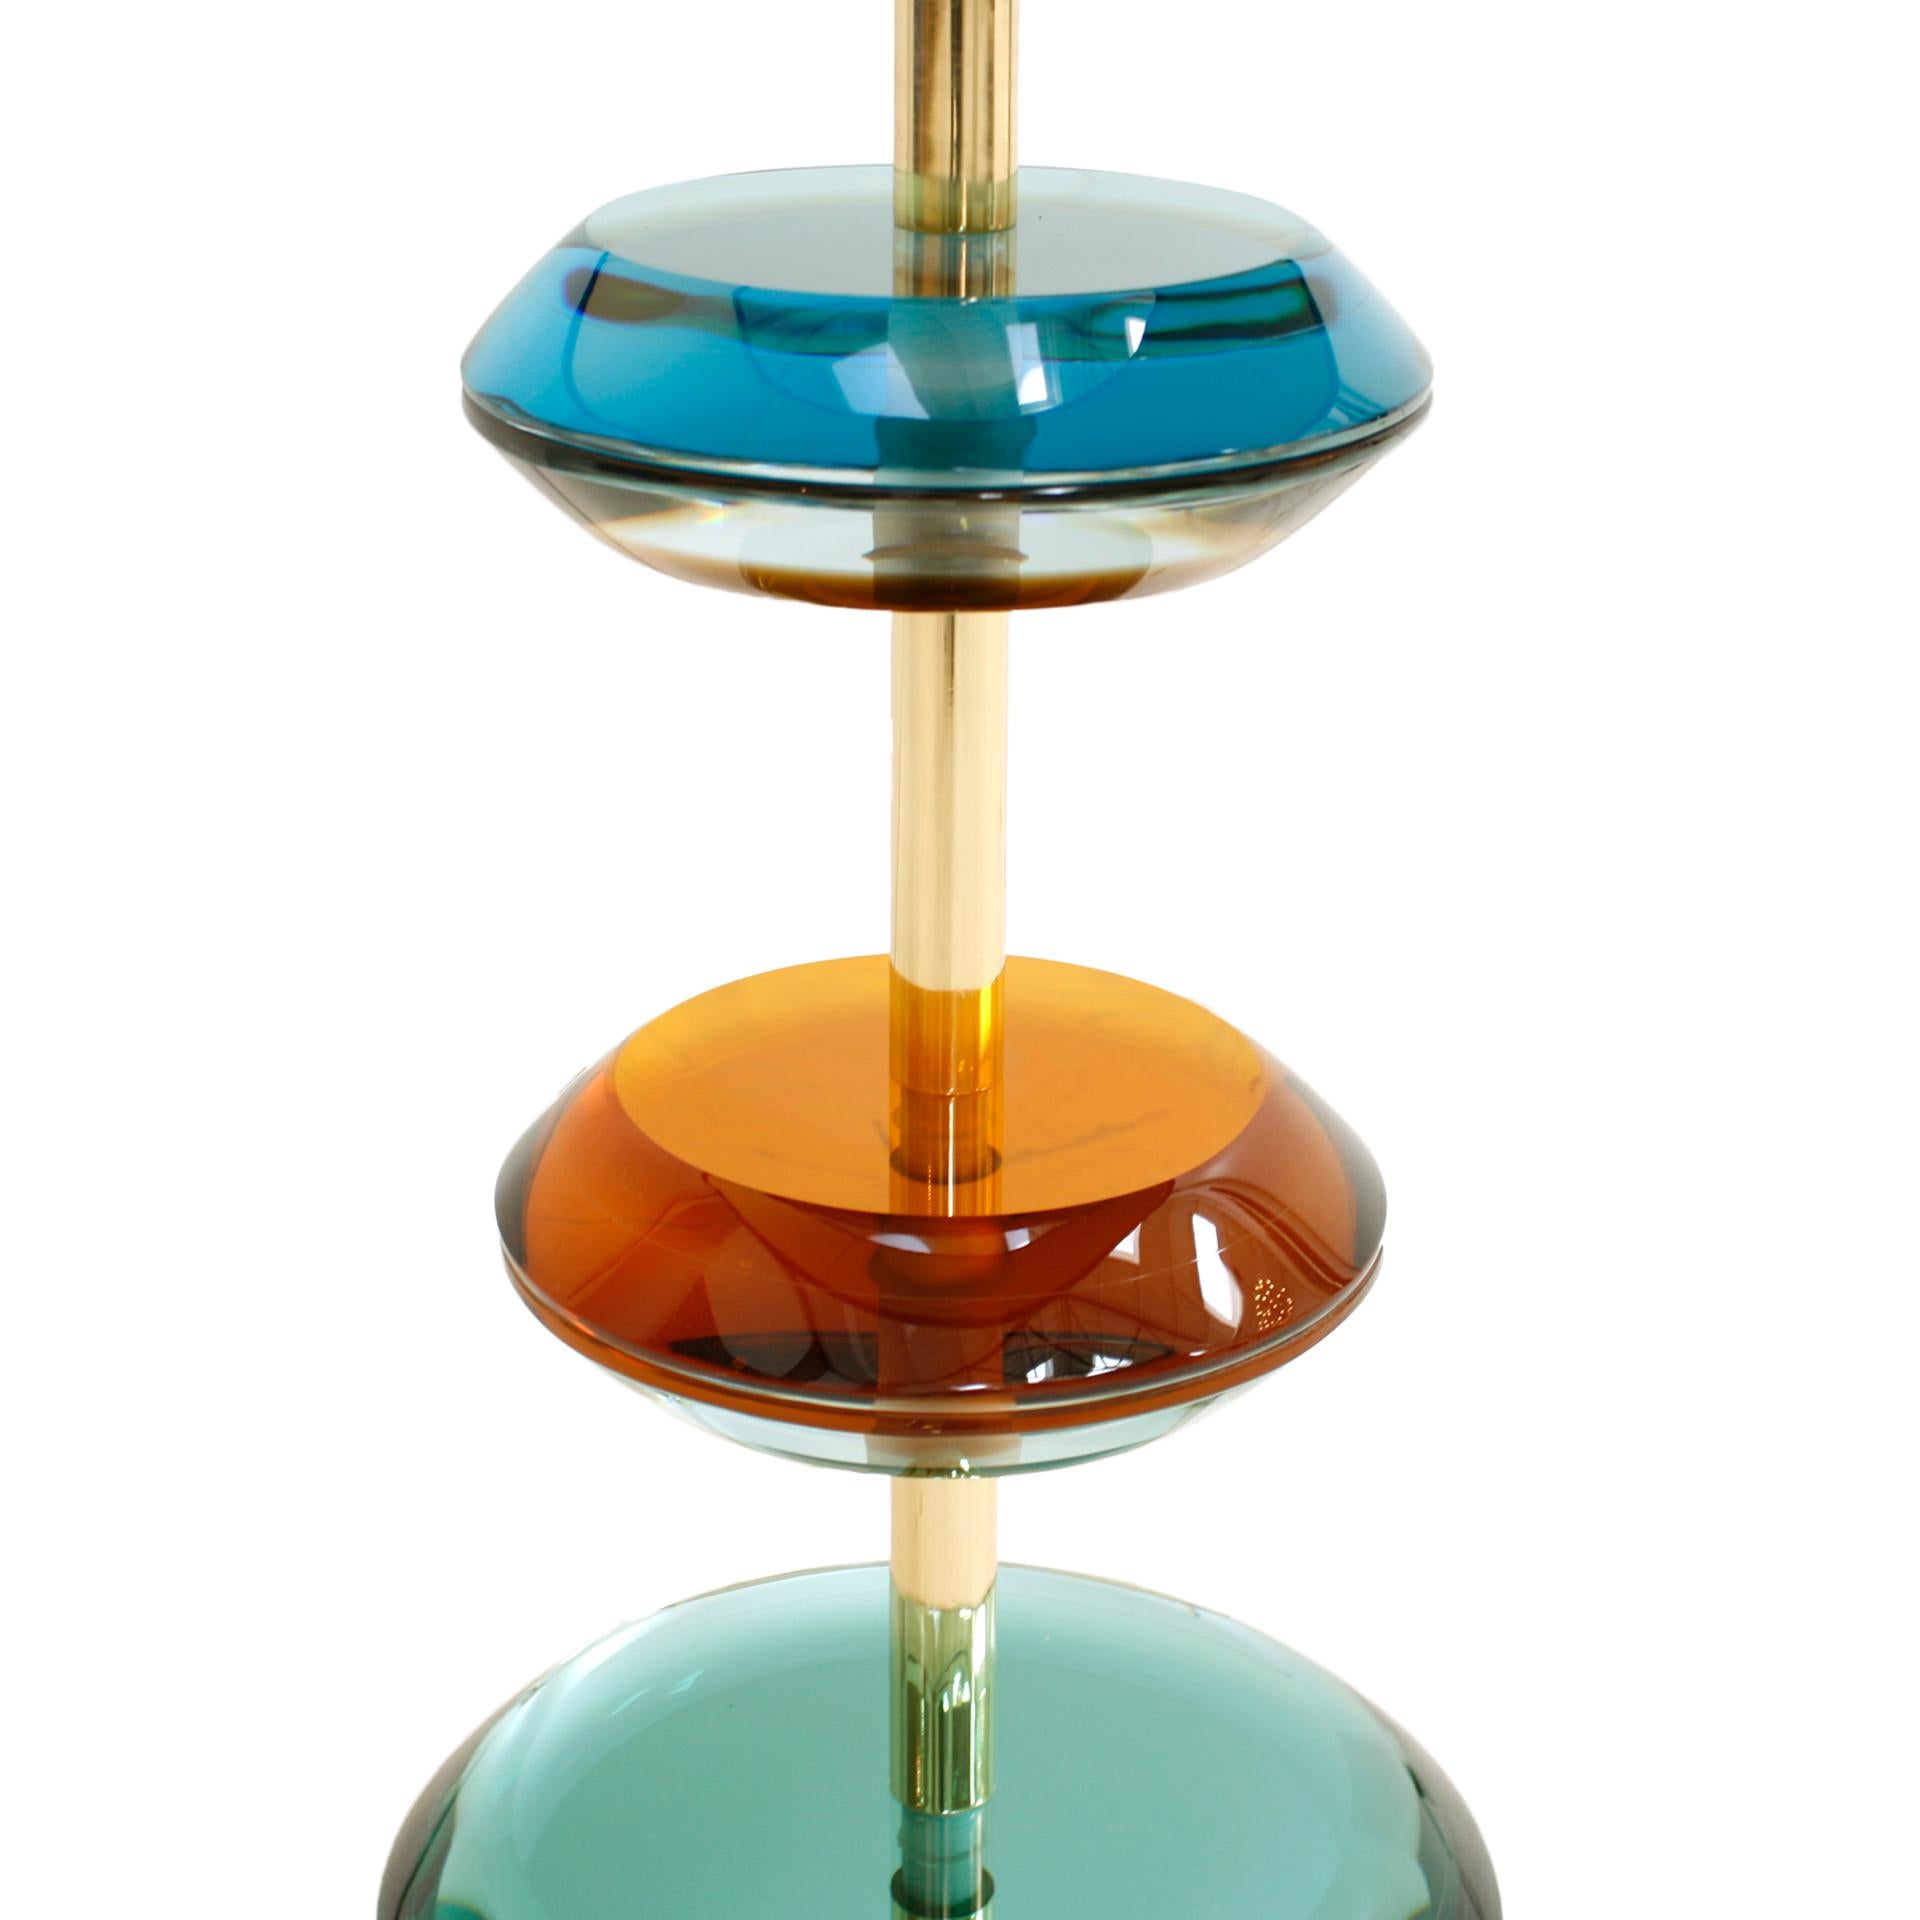 Pair of Table lamp designed by L.A. Studio, a true embodiment of elegance and craftsmanship. This exquisite lamp features a solid brass structure meticulously crafted to perfection, complemented by Murano colored glass pieces that add a touch of